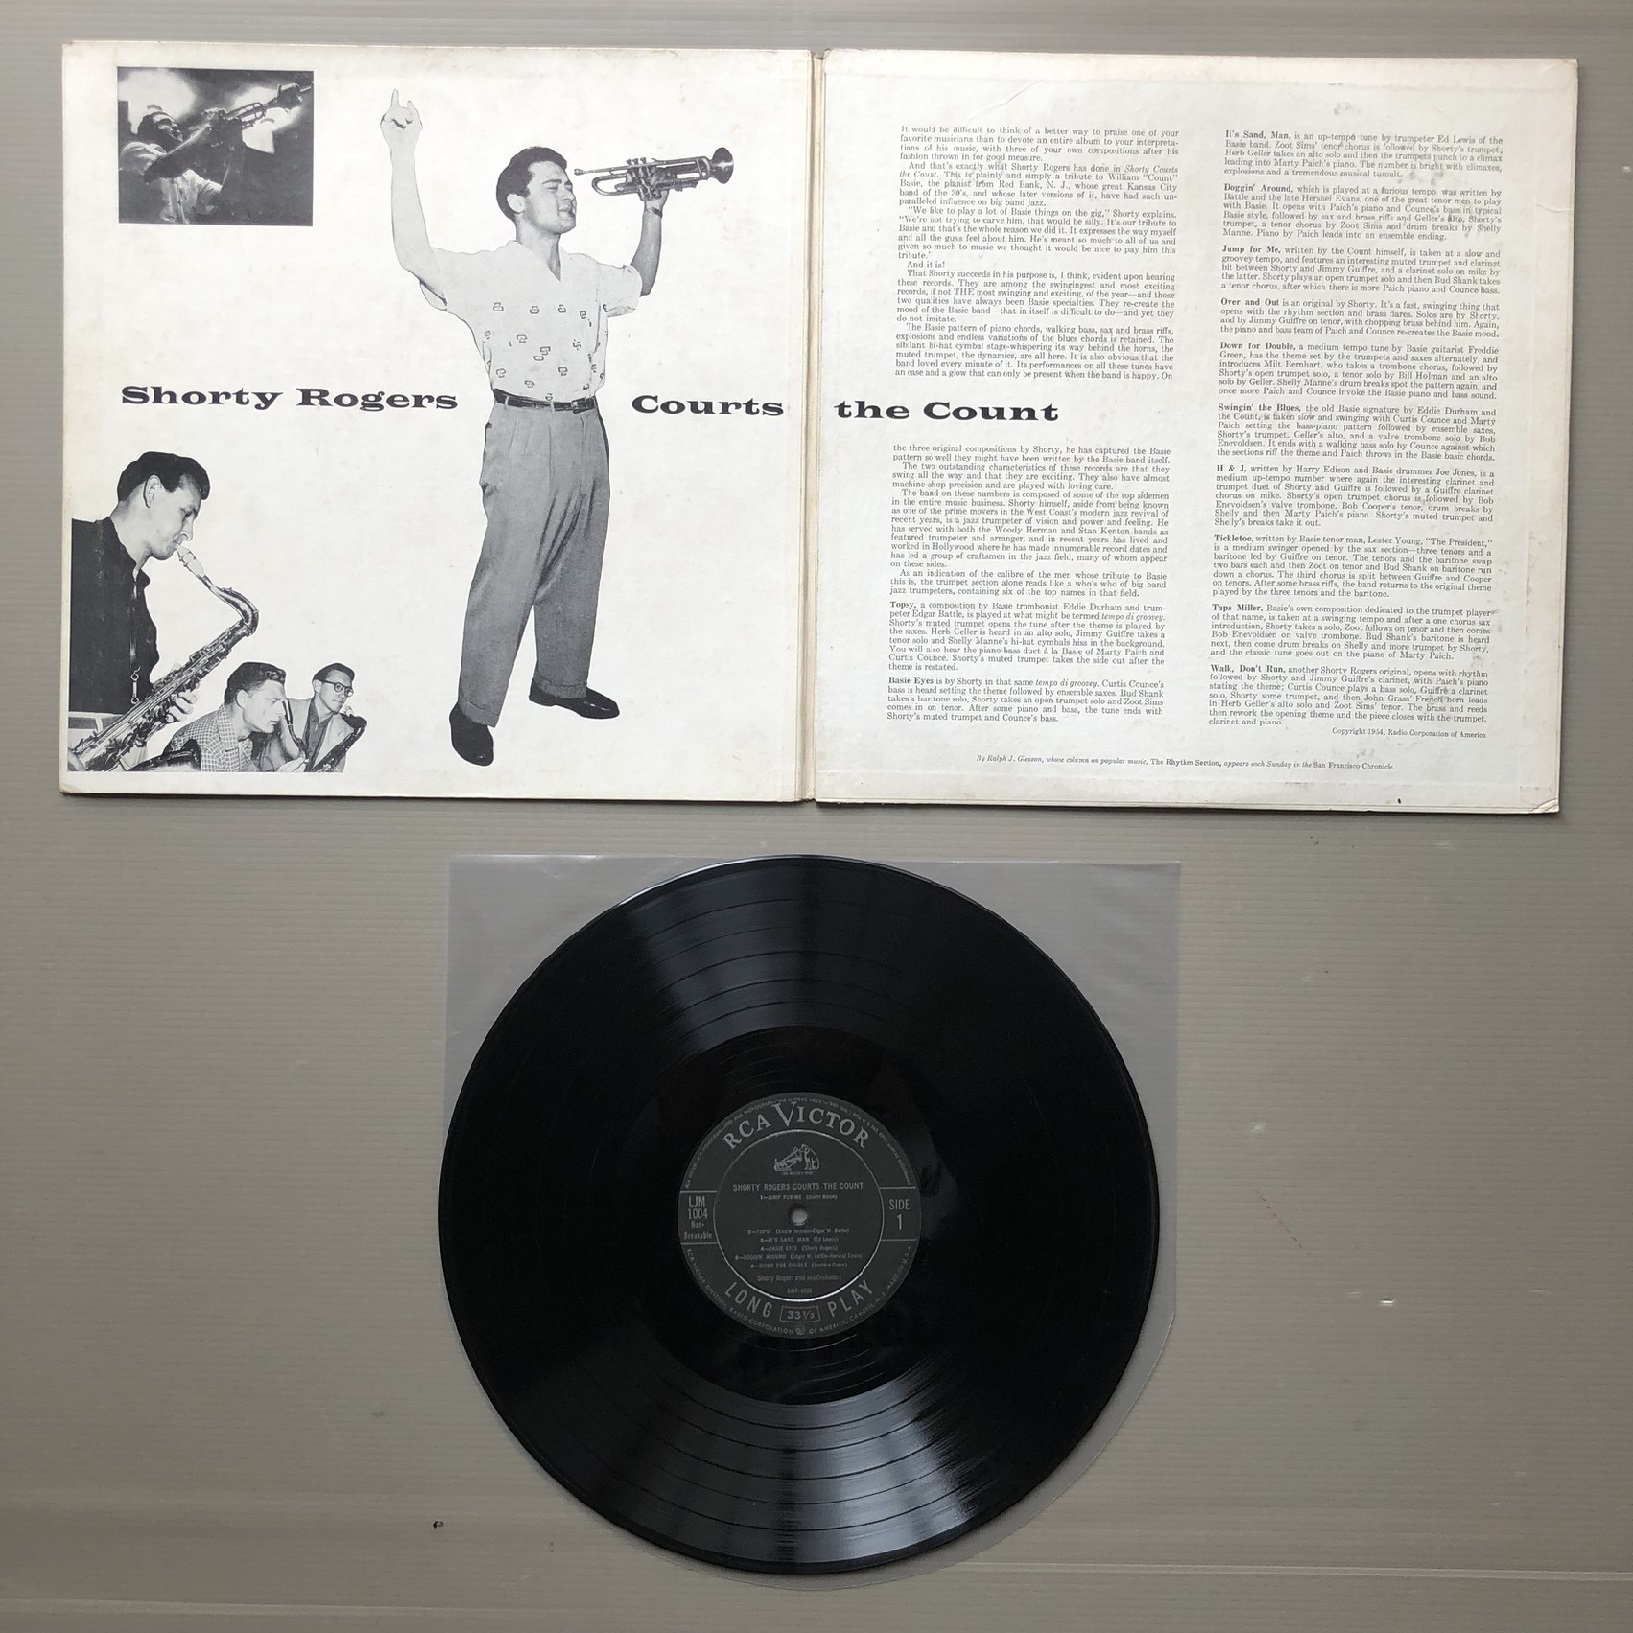 . confidence Hara Collection good record super valuable record 1954 year American original Release record shorty -* Roger sLP record Shorty Rogers Courts The Count